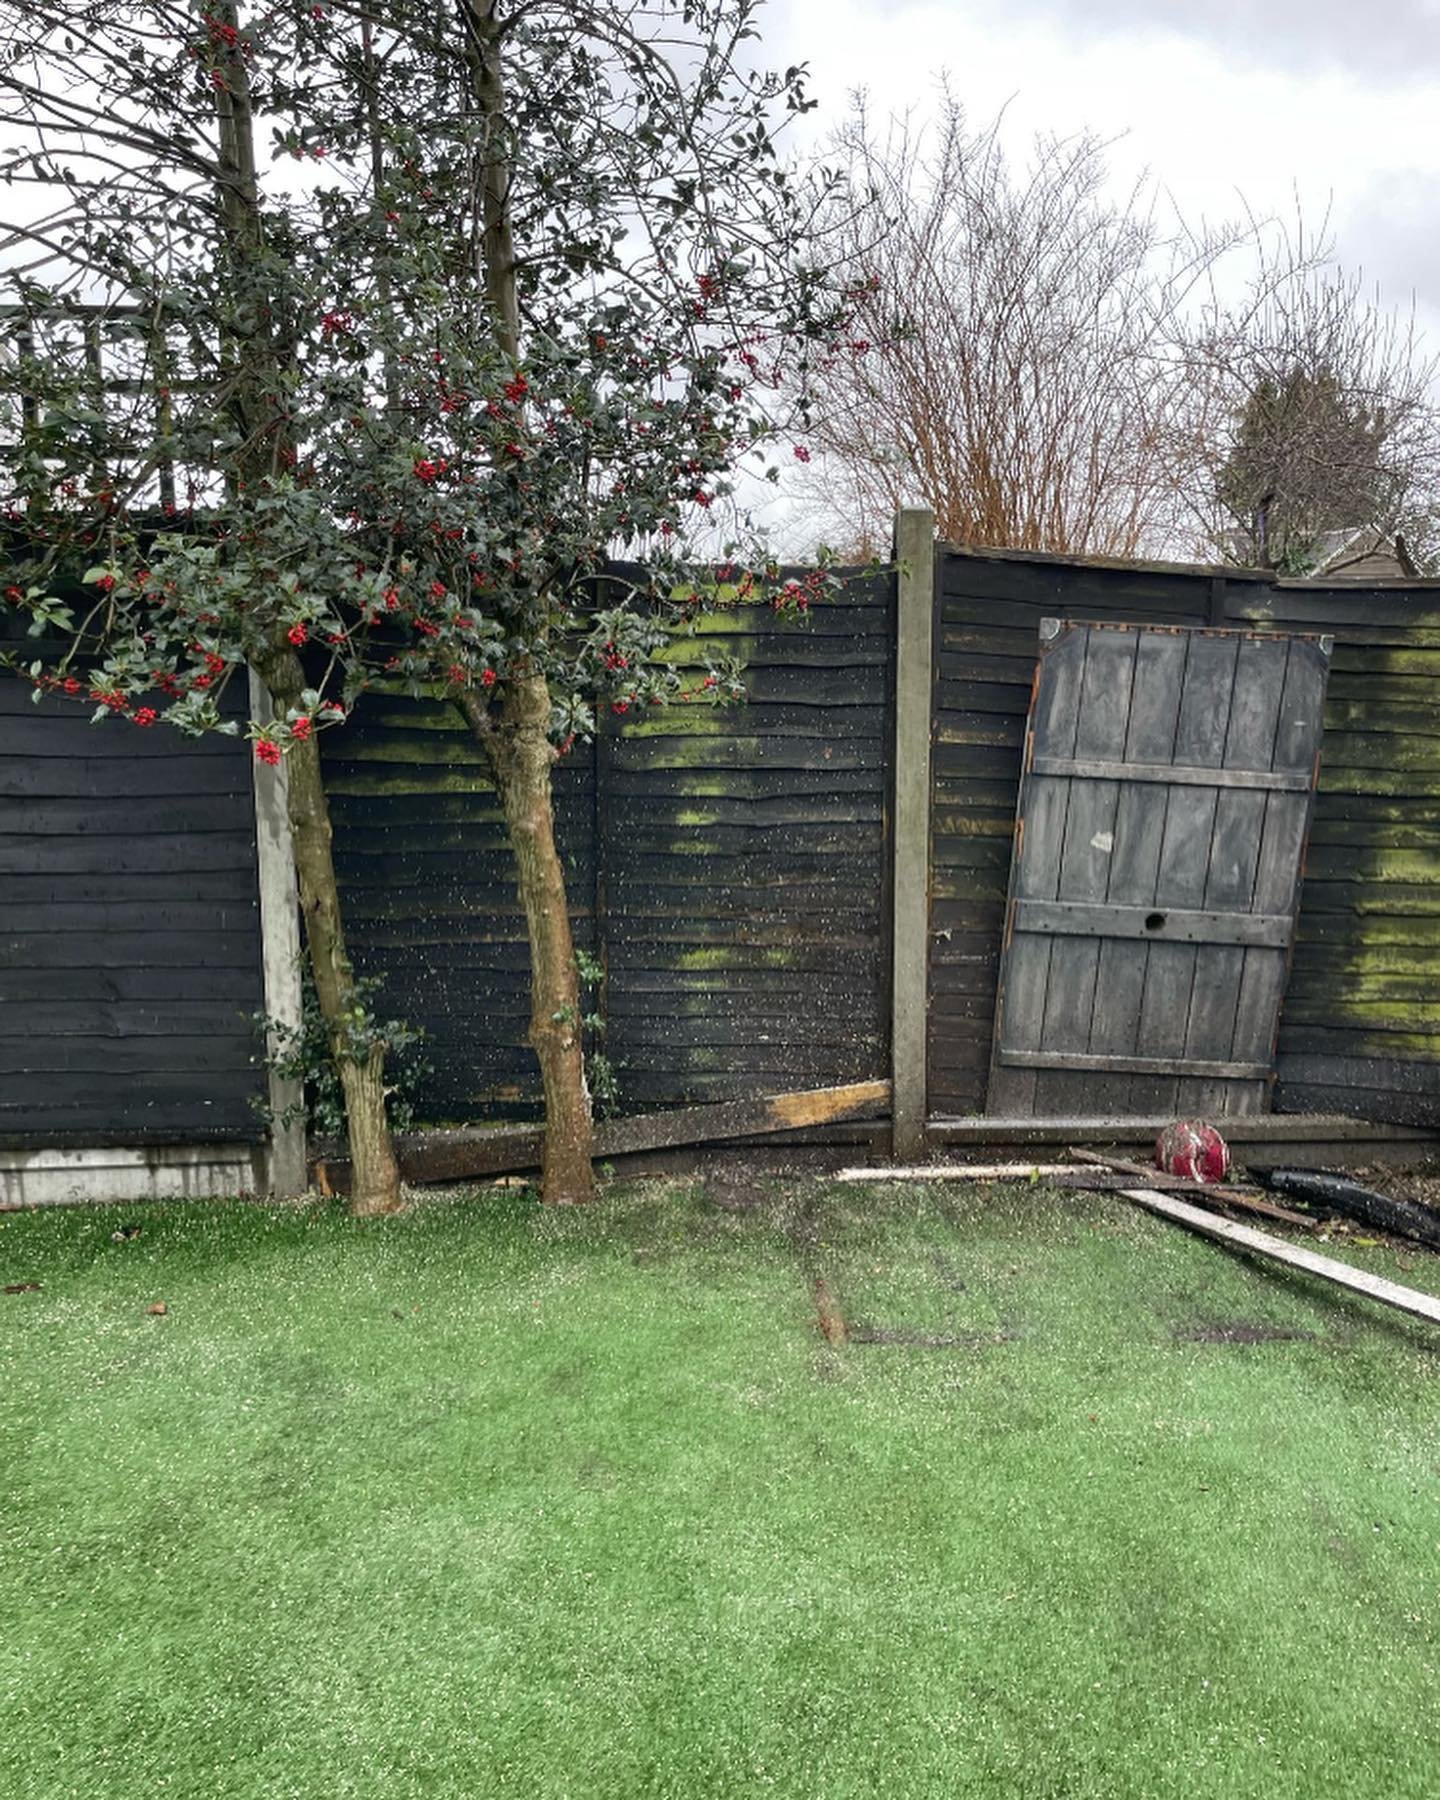 Sometimes, even small trees can cause big headaches! We recently removed a troublesome tree that was damaging the landscape. Based in South Woodford, we're here to solve your landscaping challenges. Call us today for expert solutions! 07543364253

#T